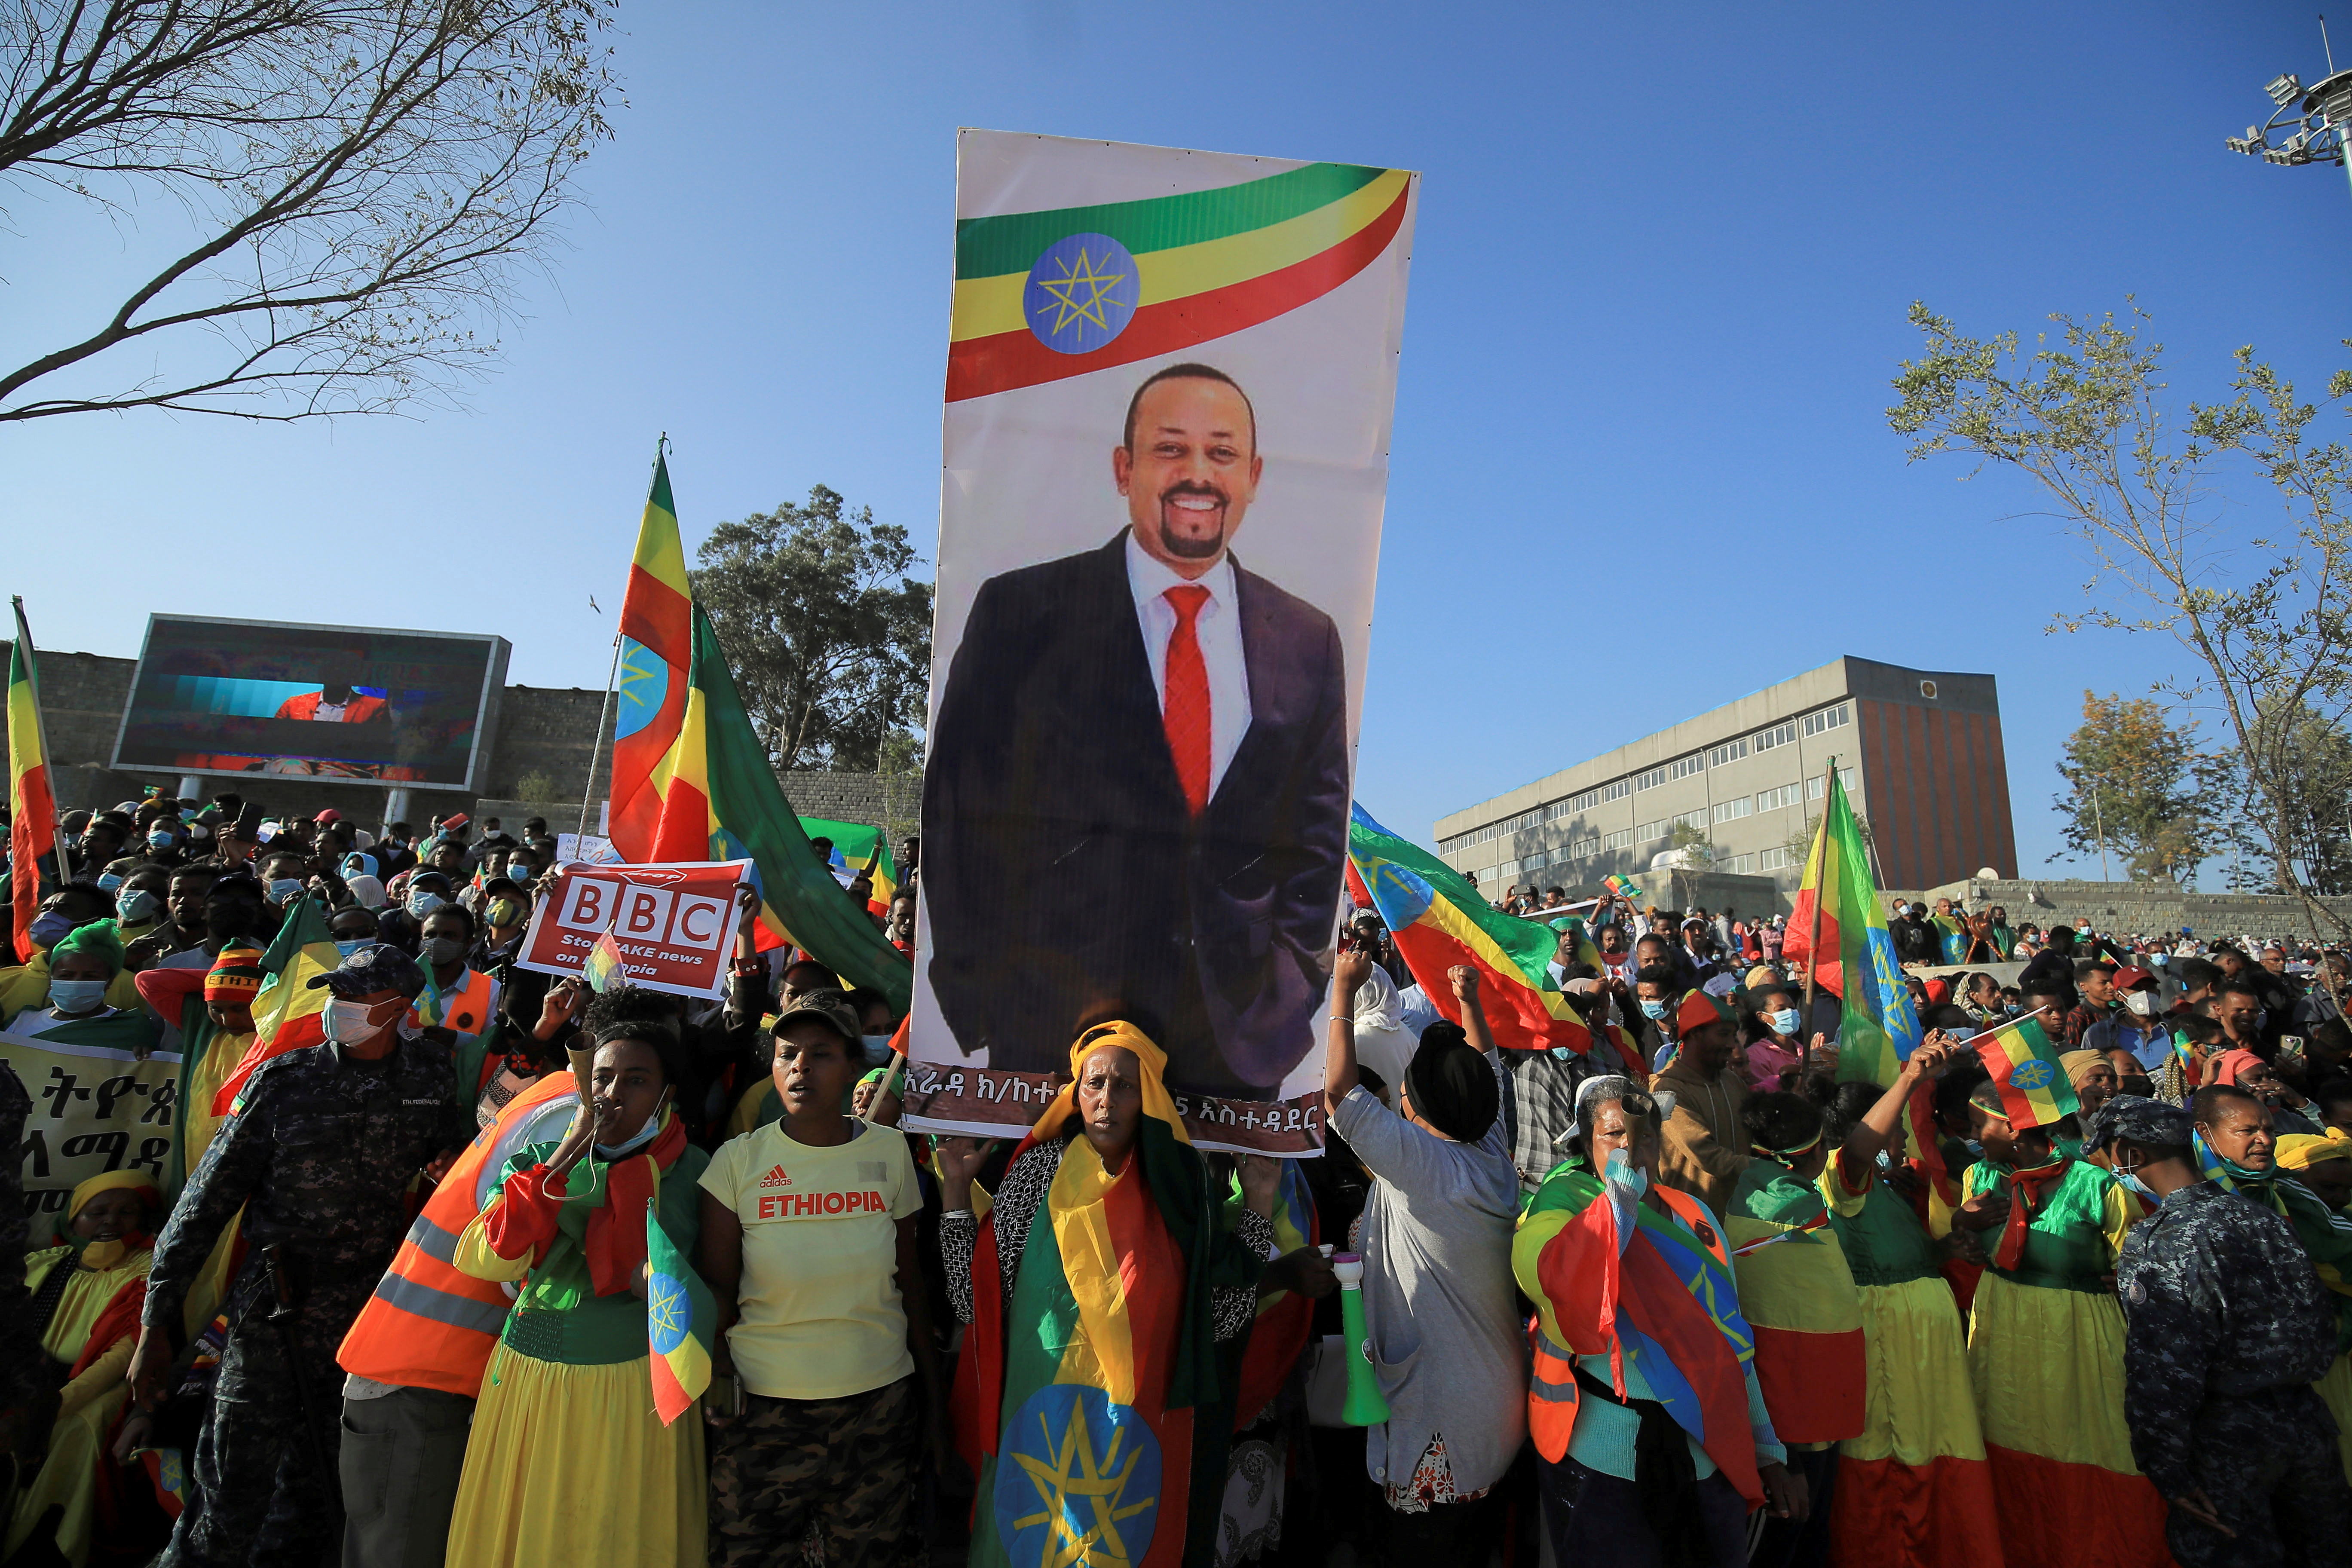 Civilians carry a placard with Prime Minister Abiy Ahmed’s portrait during a pro-government rally to denounce what the organisers say is the Tigray People’s Liberation Front (TPLF) and the Western countries' interference in internal affairs of the country, at Meskel Square in Addis Ababa, Ethiopia, November 7, 2021. REUTERS/Tiksa Negeri